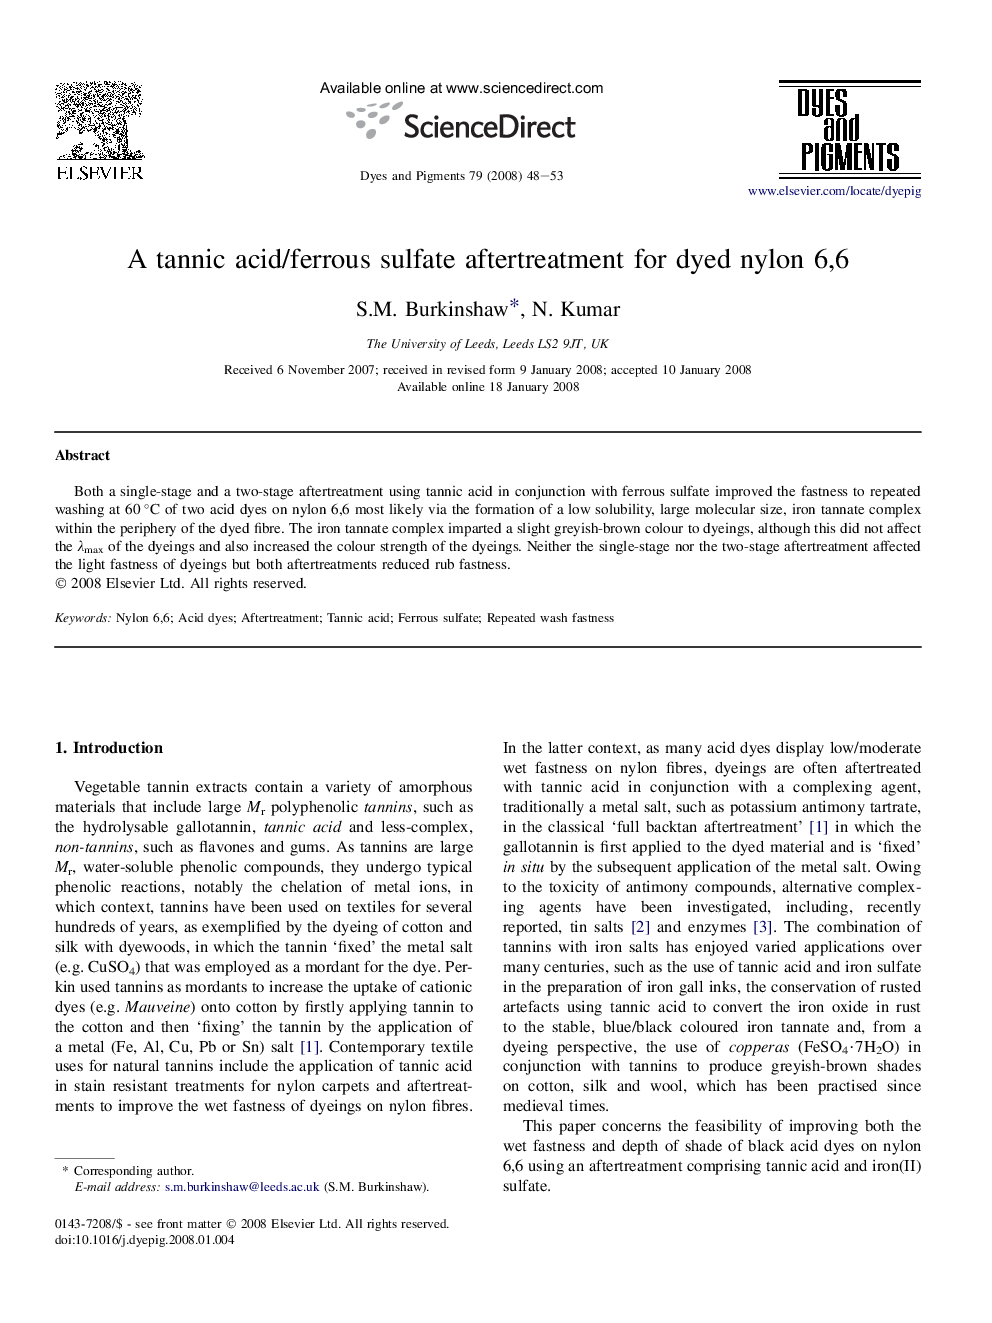 A tannic acid/ferrous sulfate aftertreatment for dyed nylon 6,6